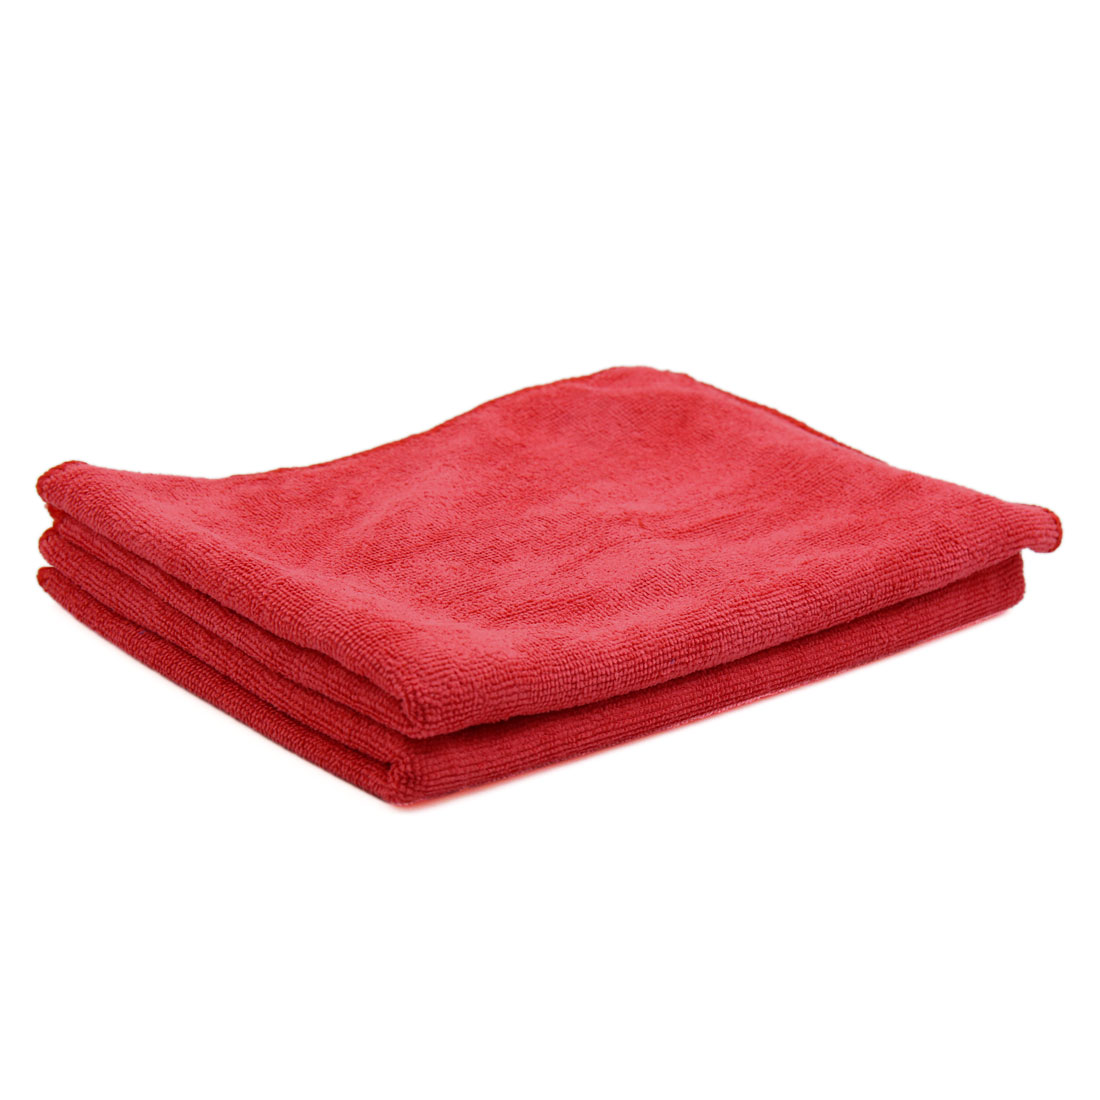 Unique Bargains 2pcs 65 x 33cm 250GSM Microfiber Towel Cleaning Cloths for Auto Car Washing Red - image 1 of 3